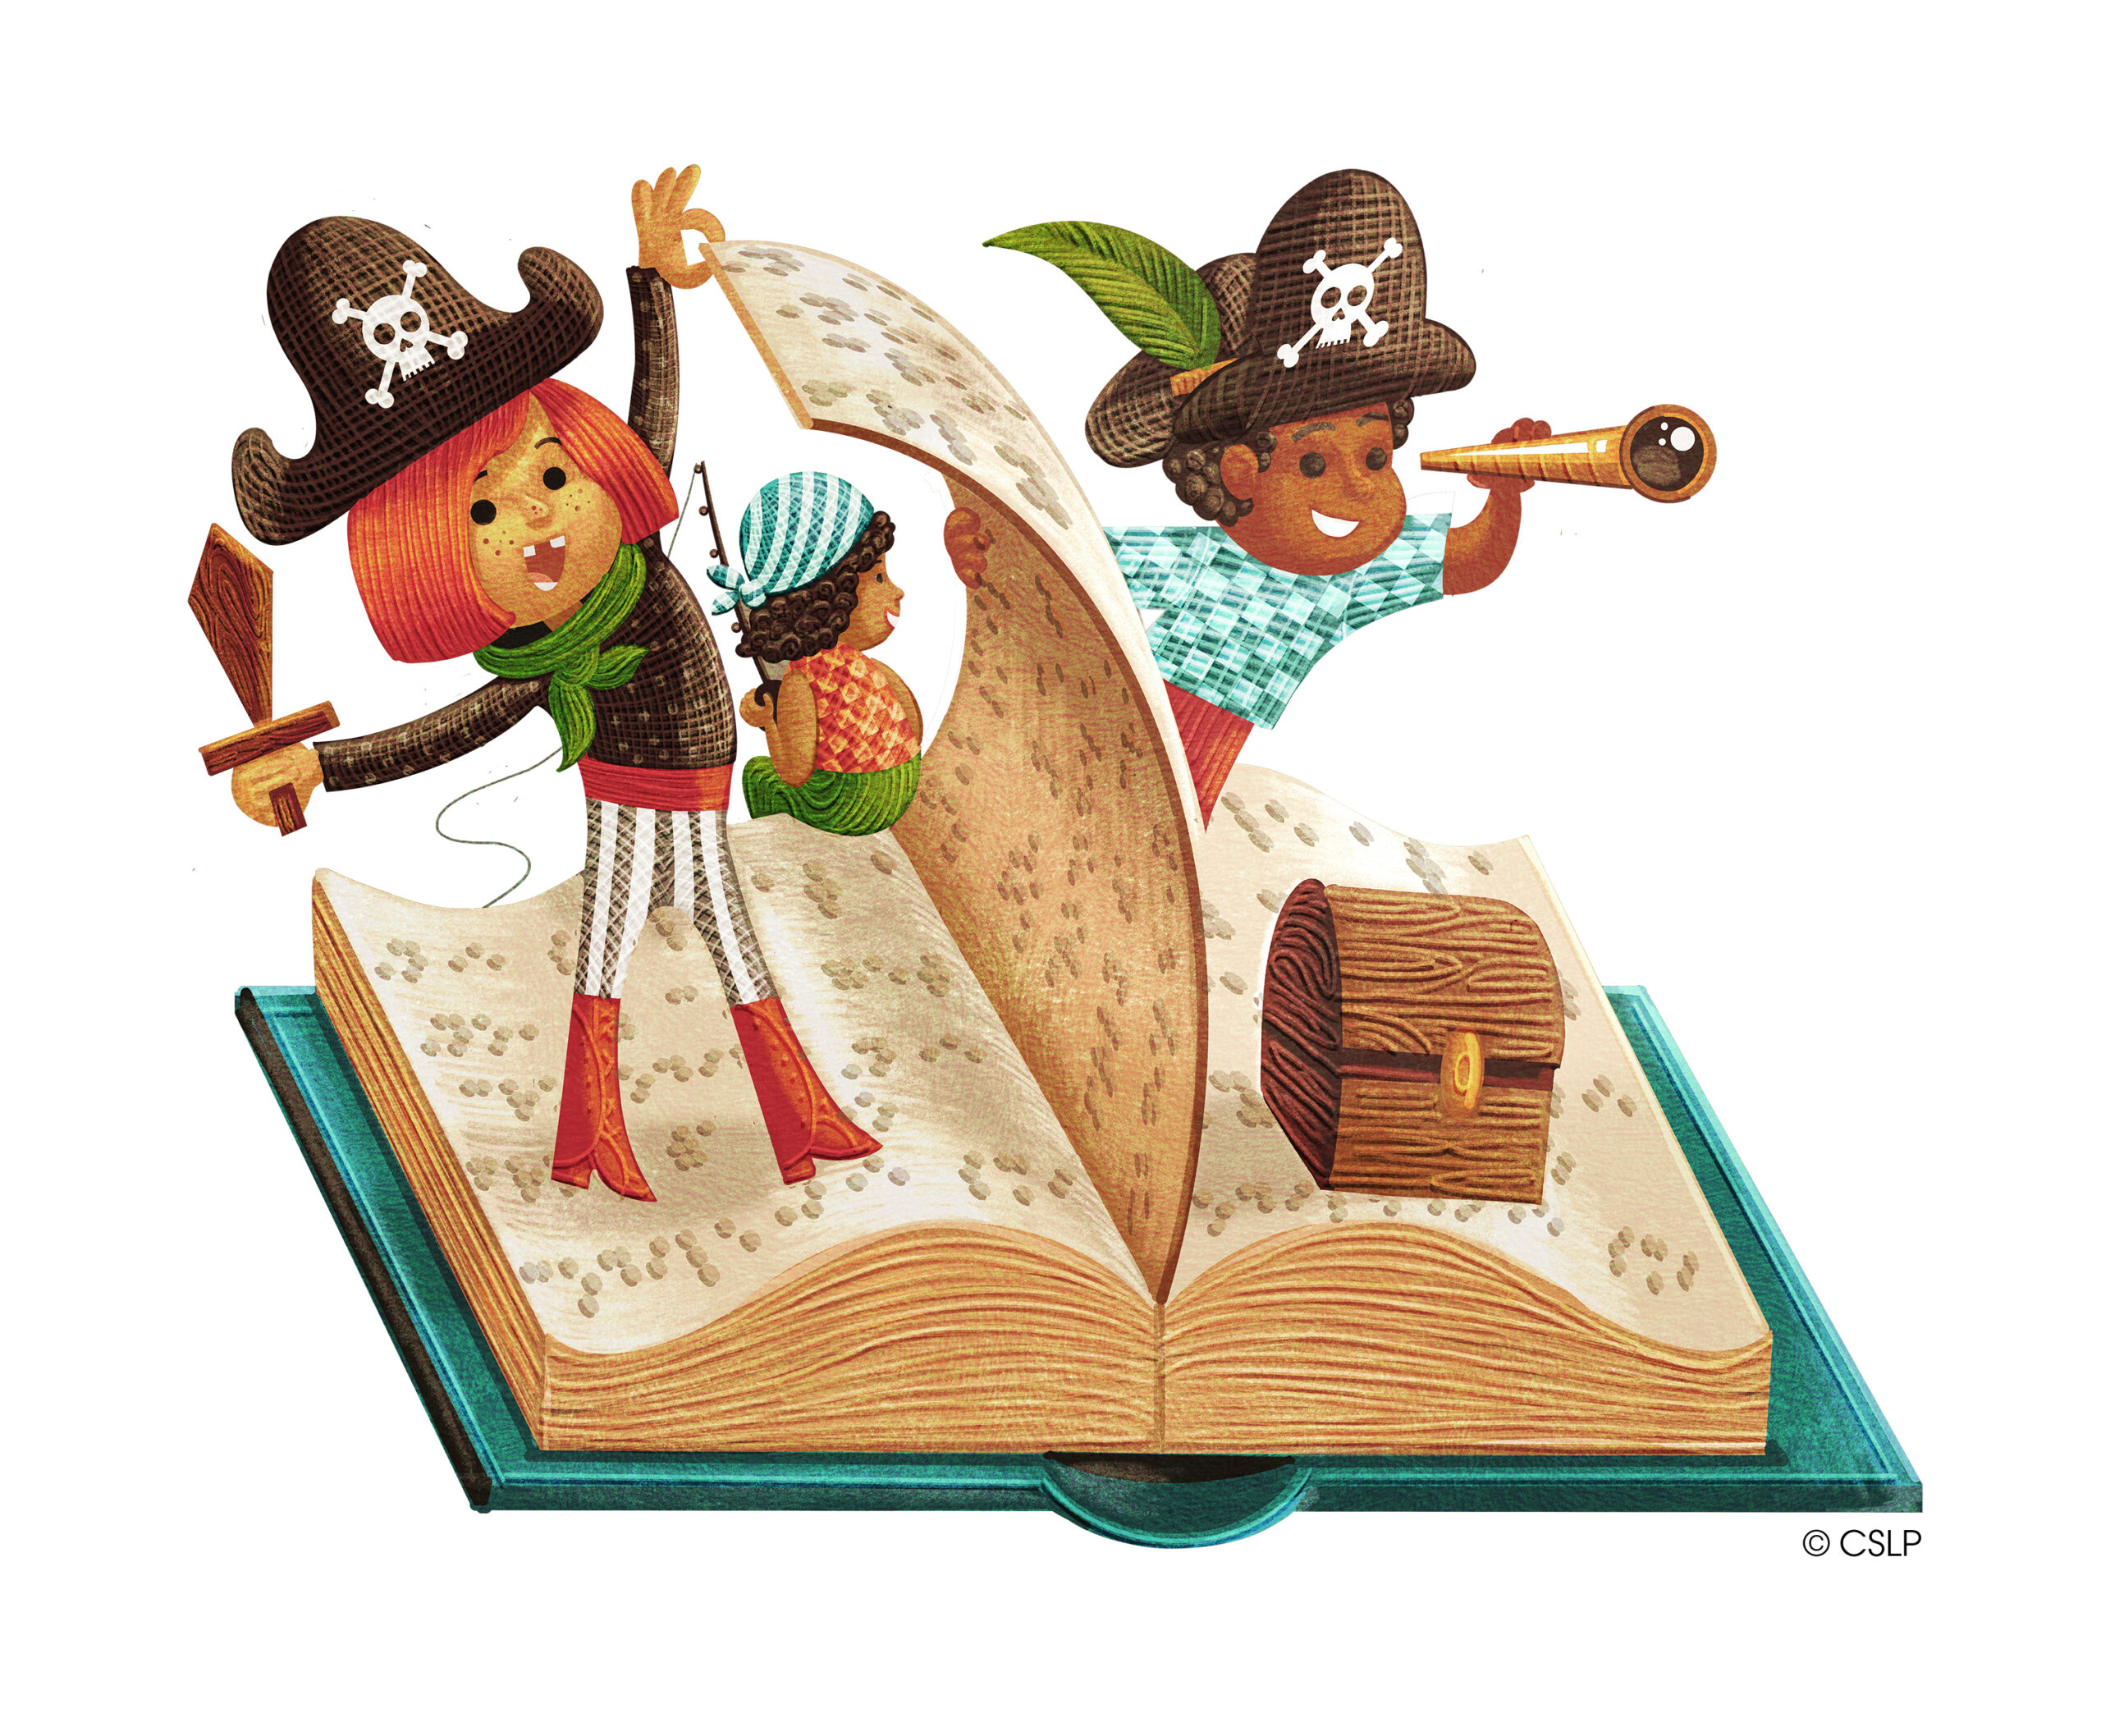 Cartoon of 3 children dressed as pirates standing on the pages of their boat, which is actually the open pages of a book.